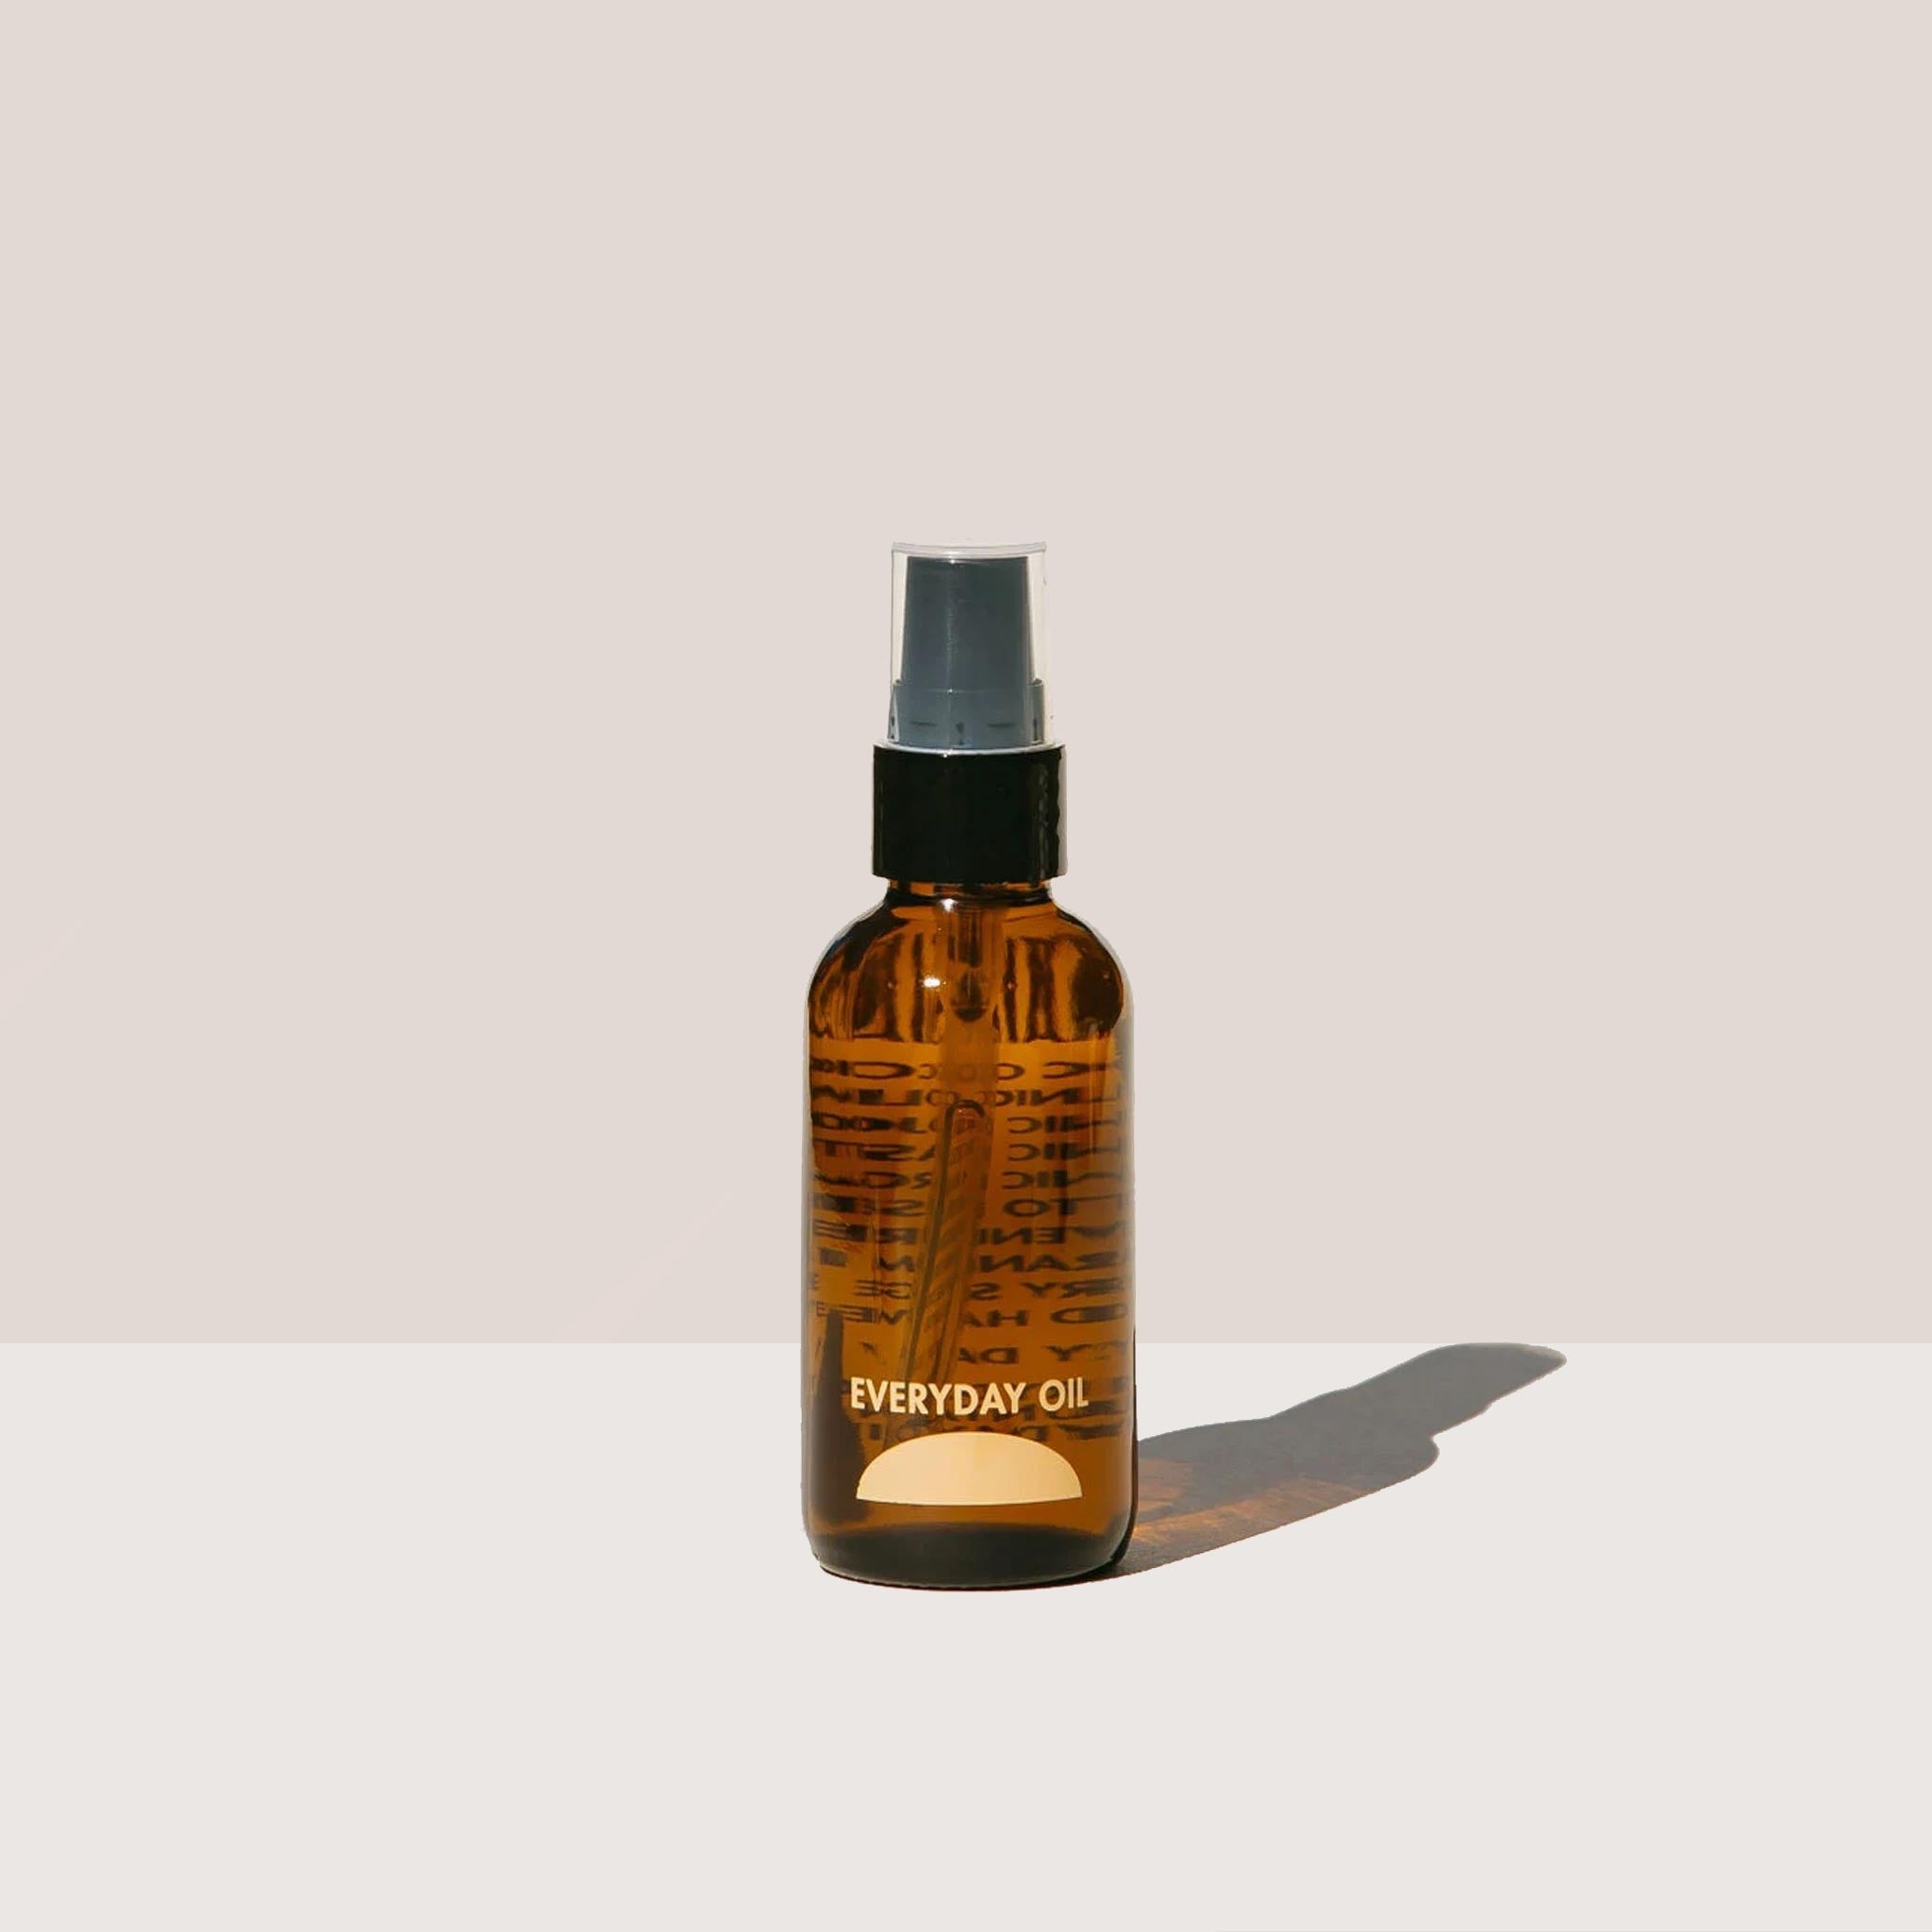 Everyday Oil - 2oz Bottle, available at LCD.